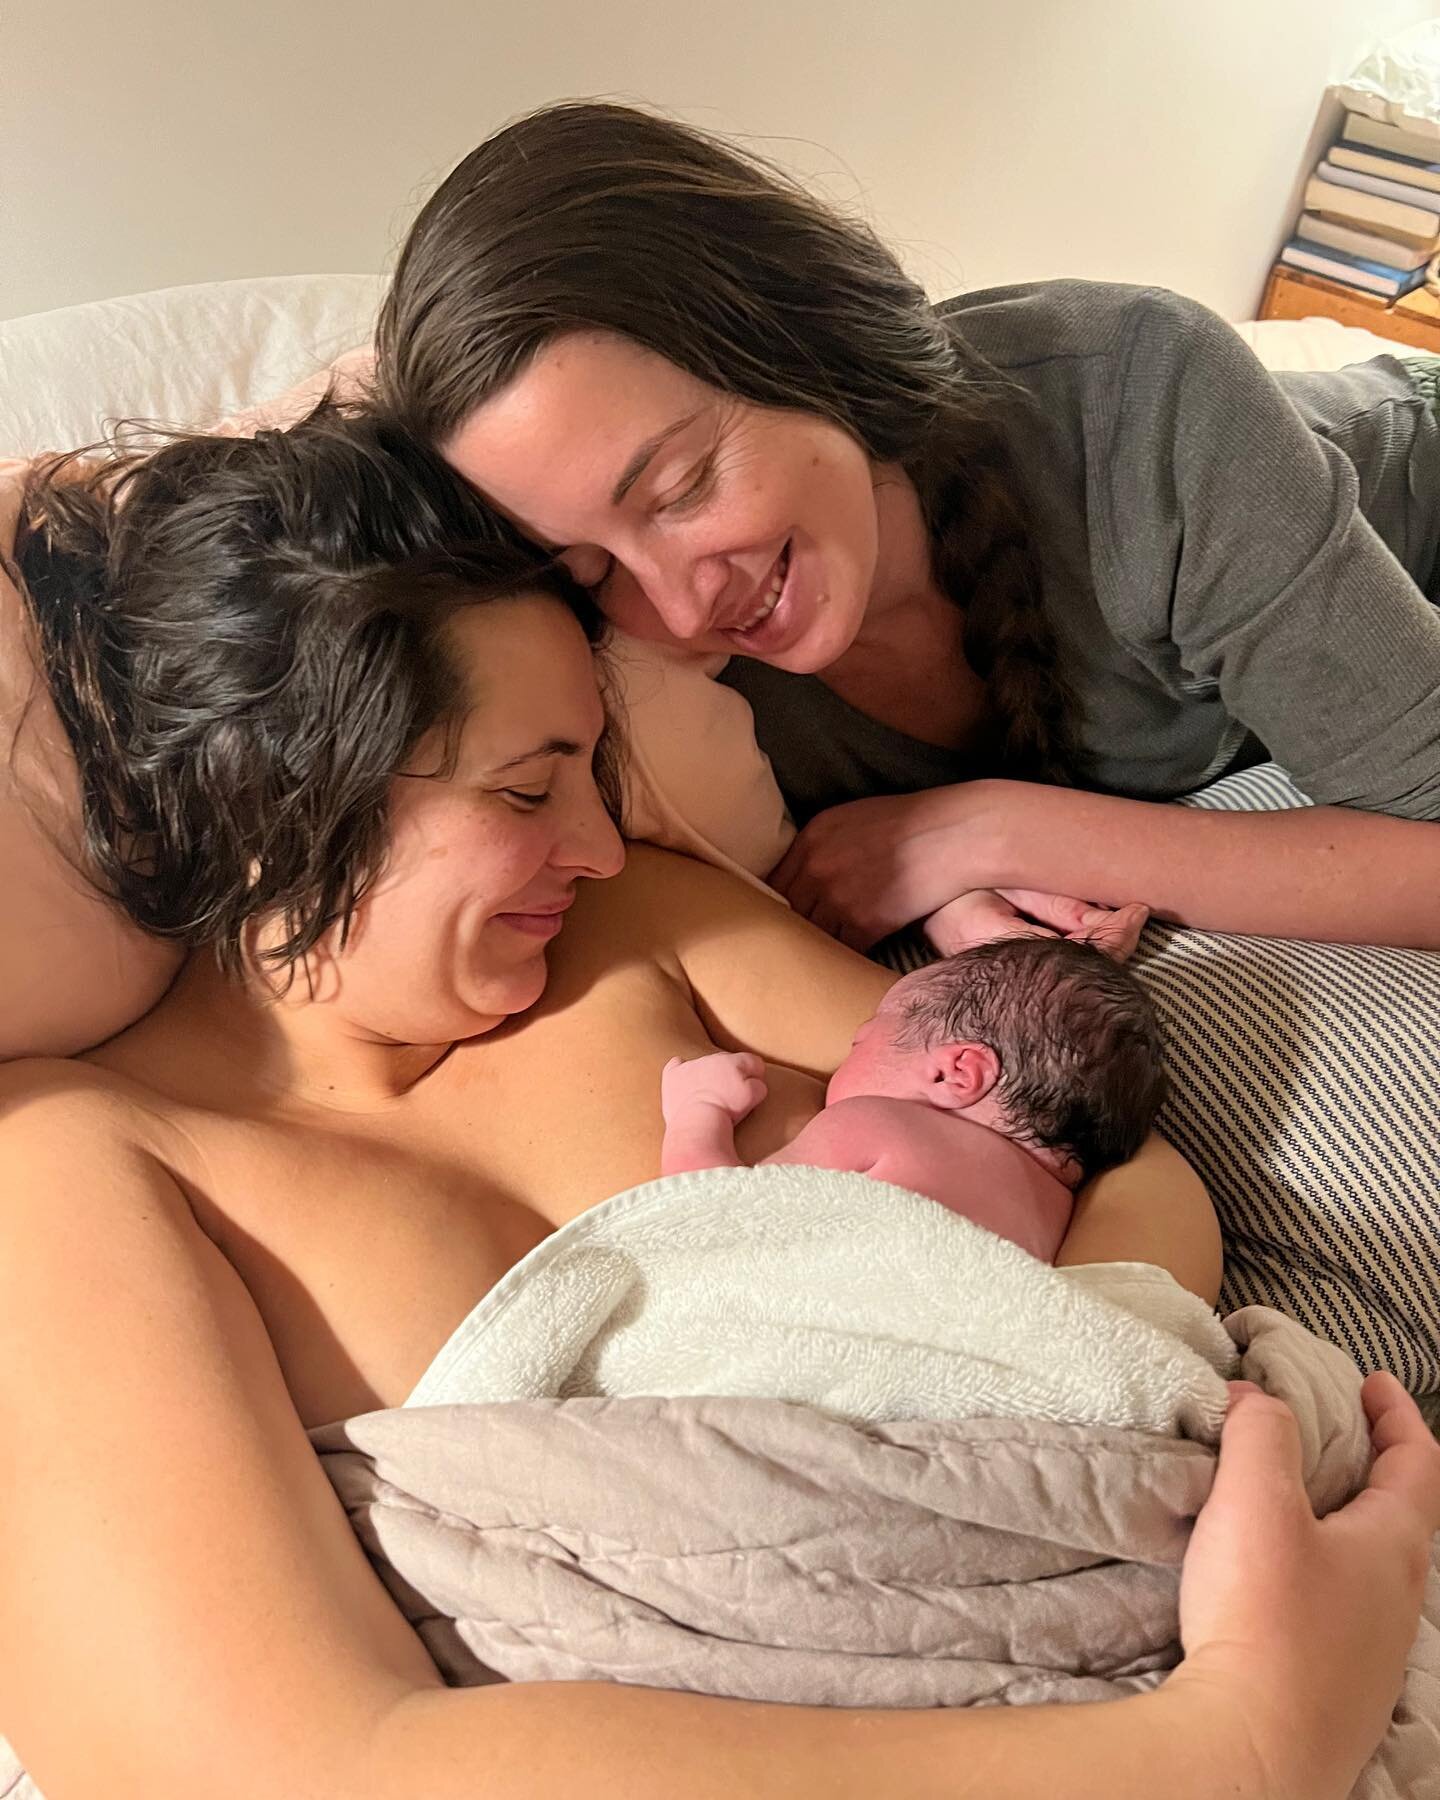 @danikanormannn accidental freebirth. 

I love this stage of my life. A time when women ask me to attend their birth, instead of getting assigned to me in the hospital. It&rsquo;s a huge honor to sit with friends as they dance their babies into this 